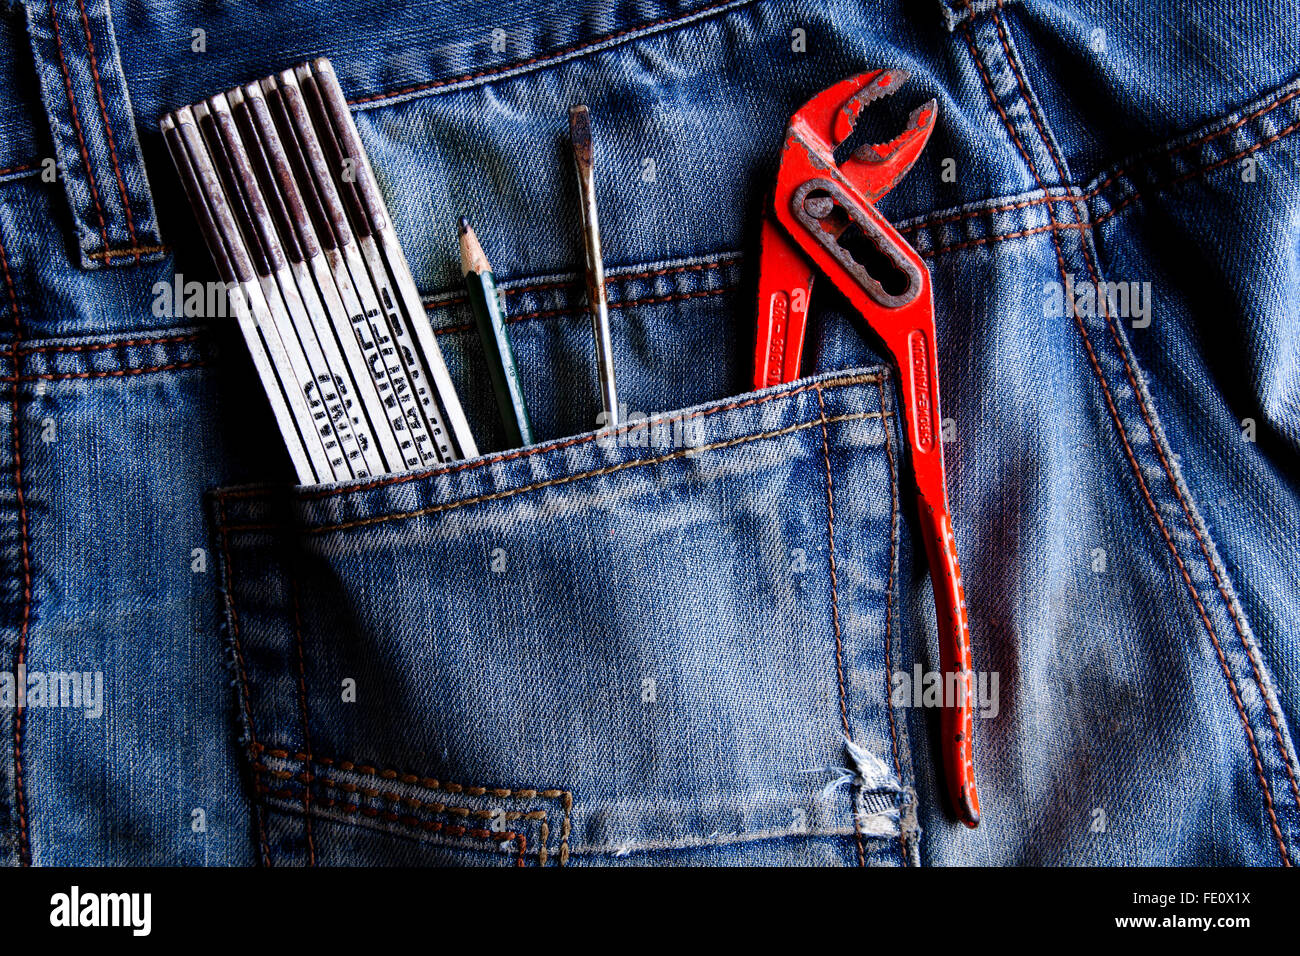 Ruler, pencil, screwdriver, pipe wrench, in a jeans pocket Stock Photo